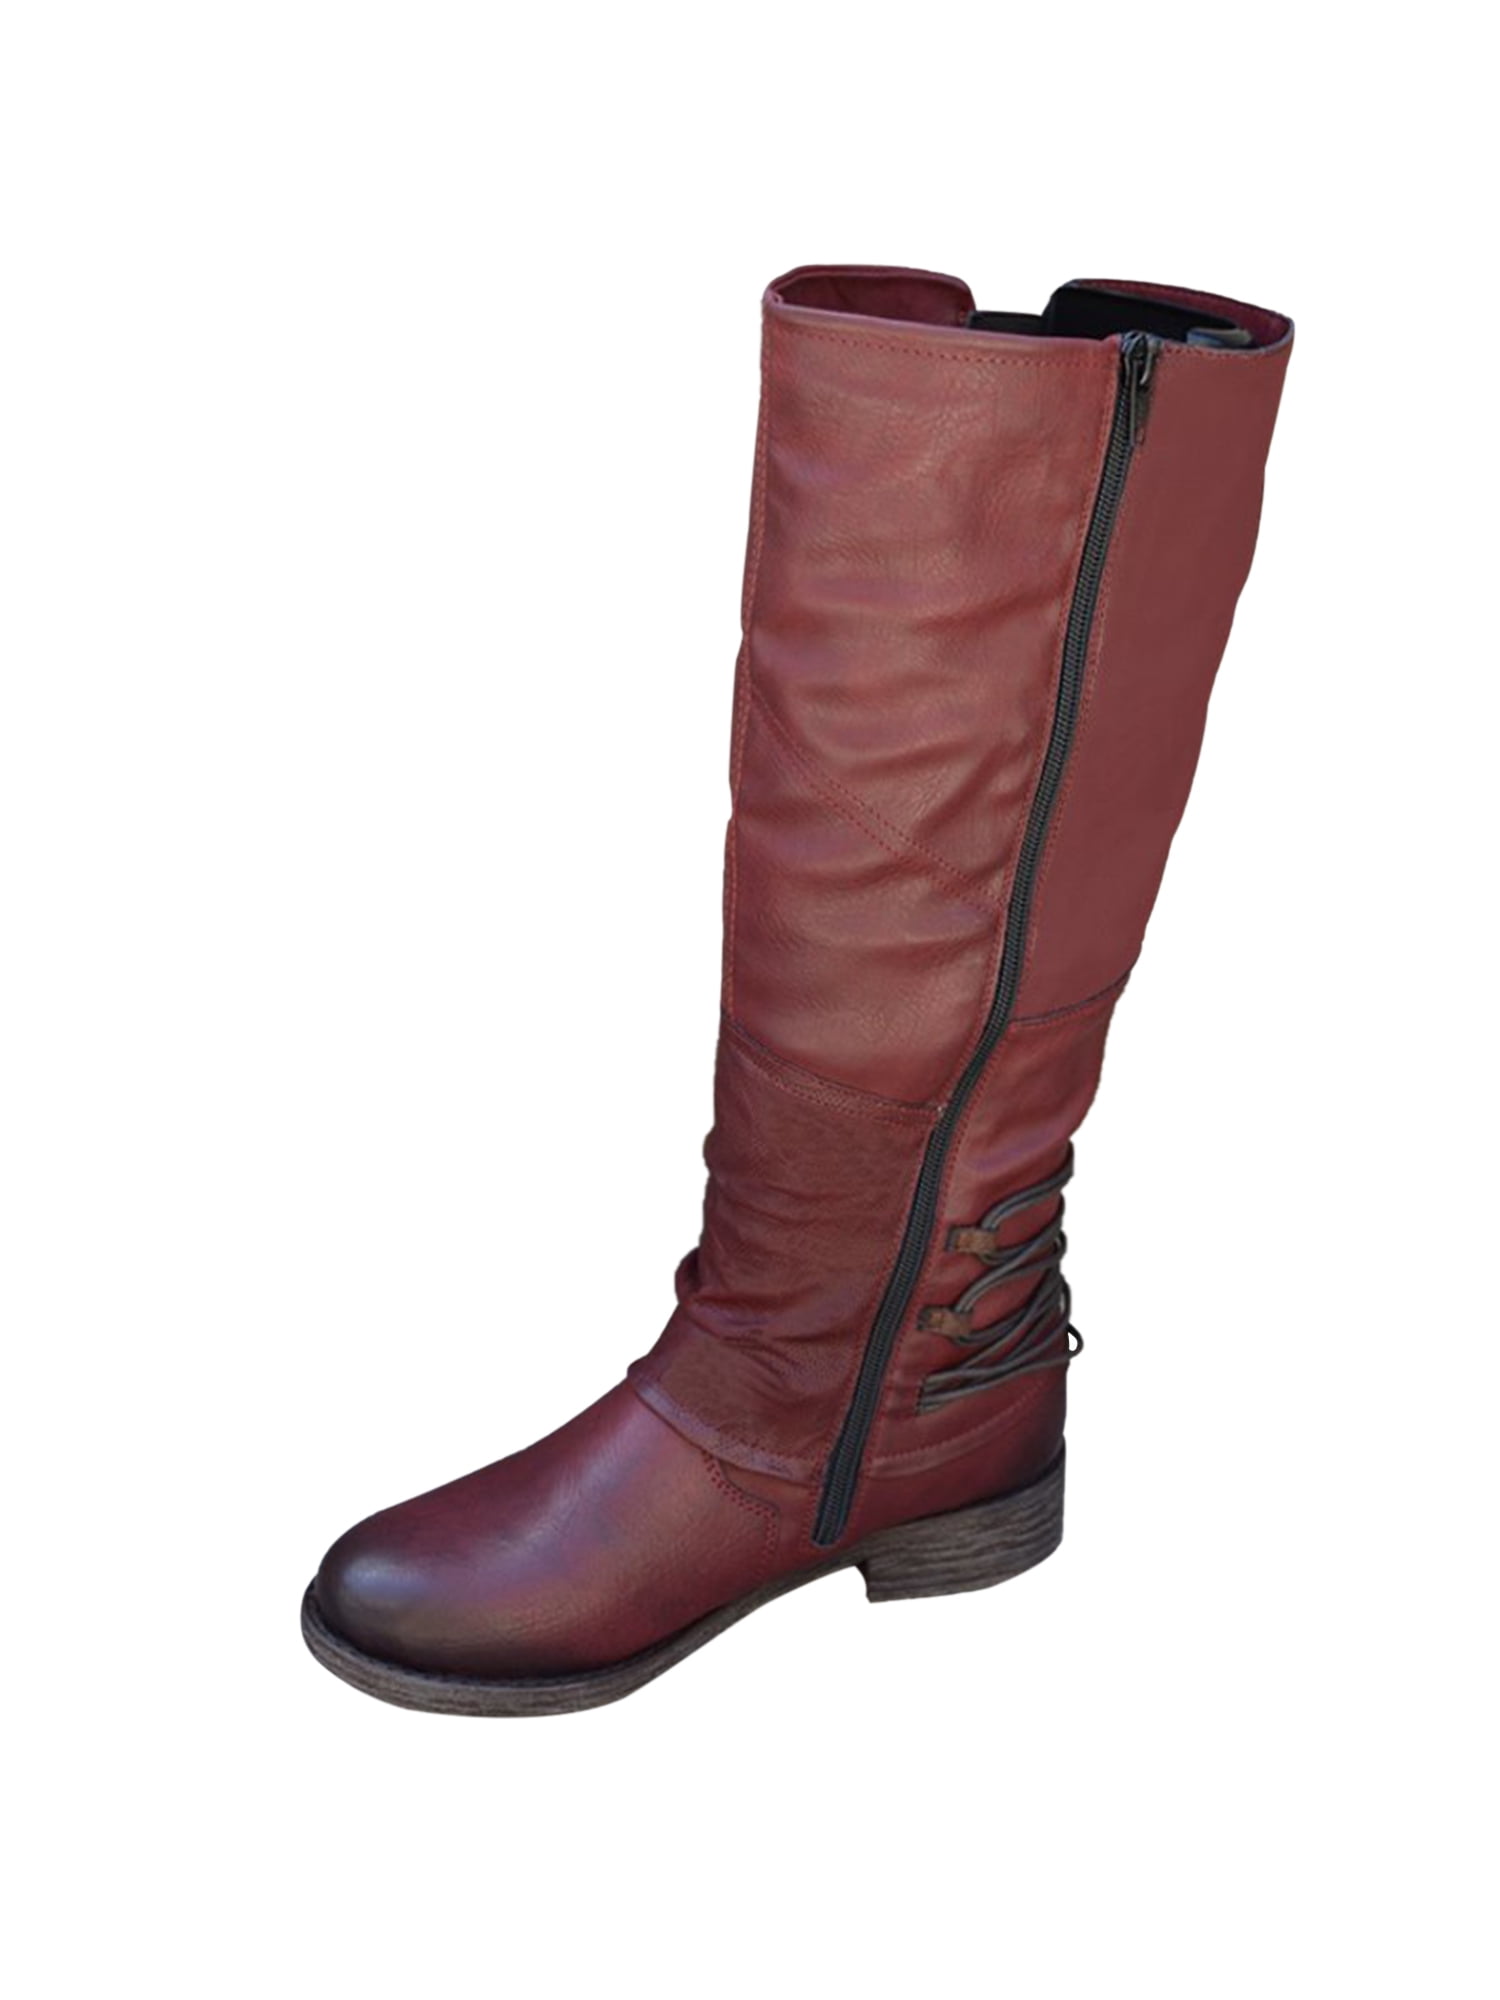 Simple Round Toe Buckle Strap Platform Low Stacked Boots Womens Dressy Knee High Boots with Zipper 